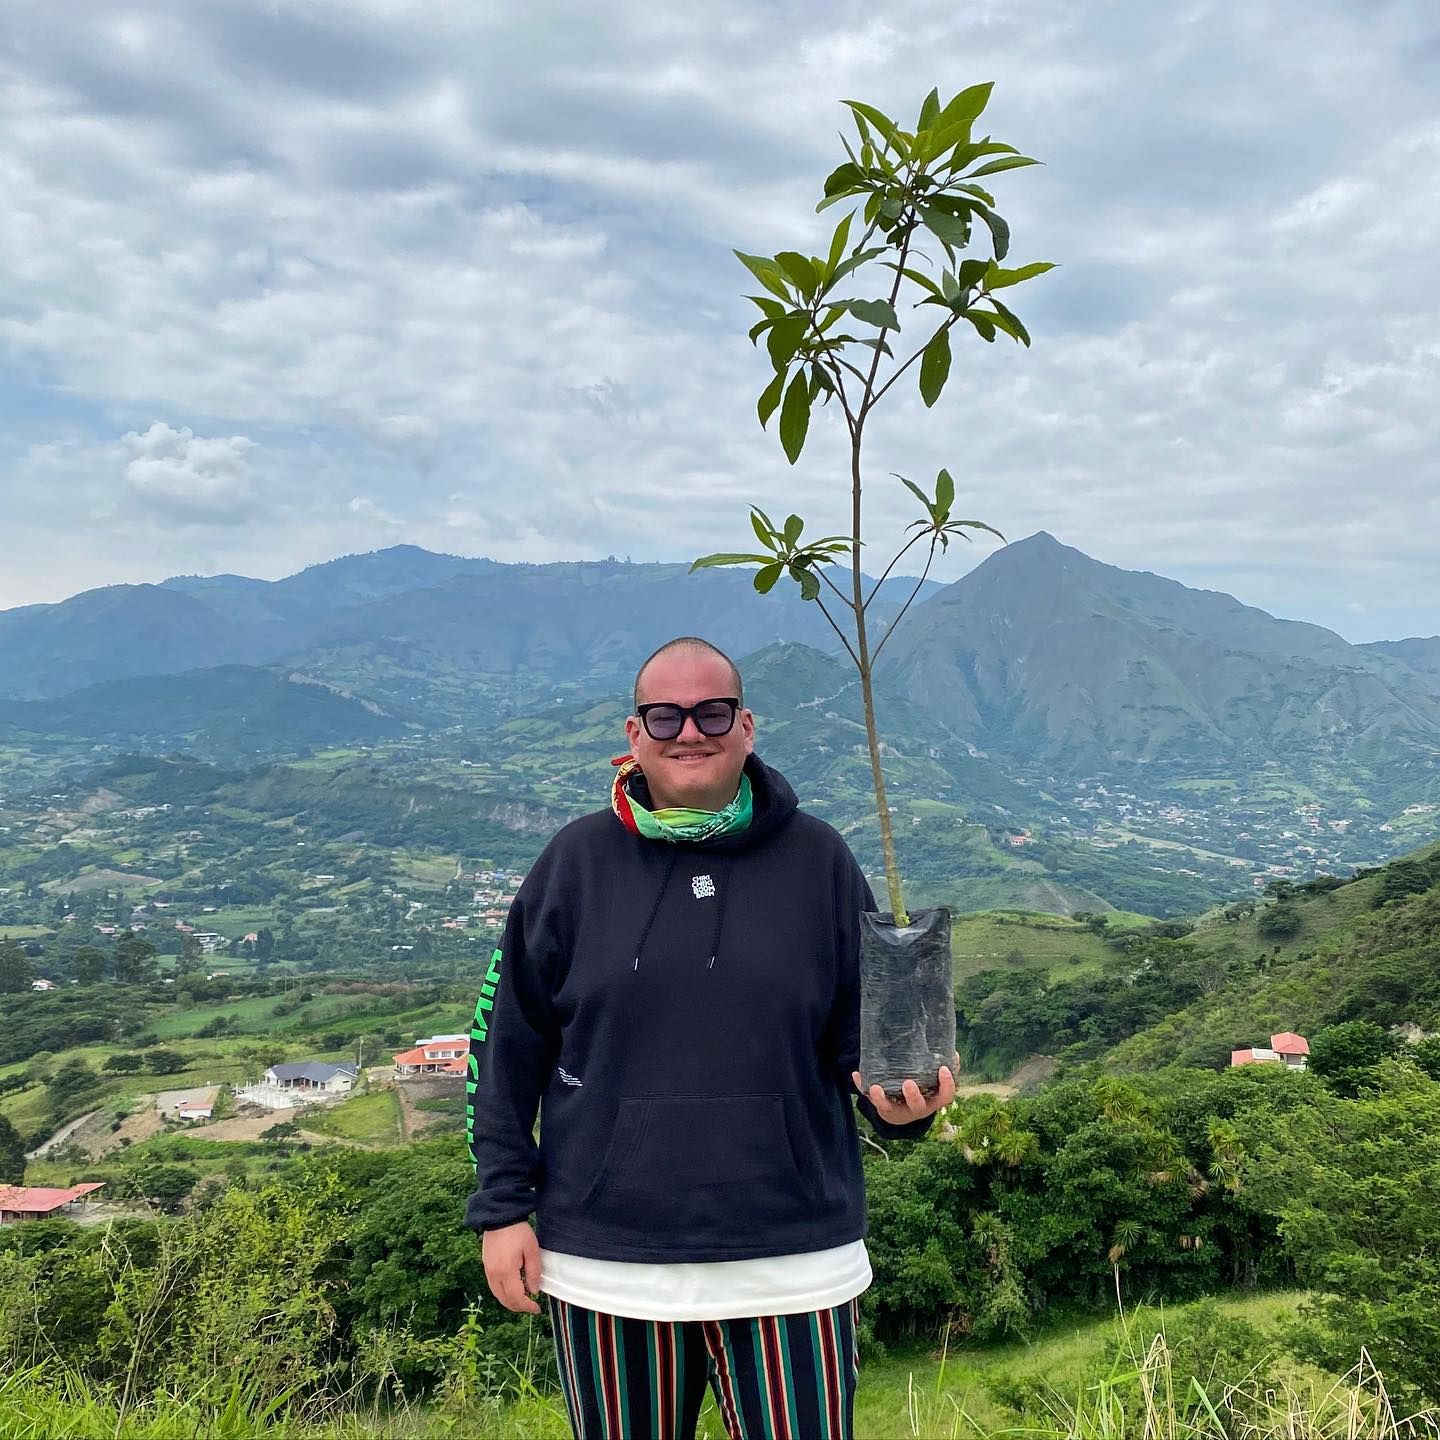 Man standing in front of the jungle holding a small tree